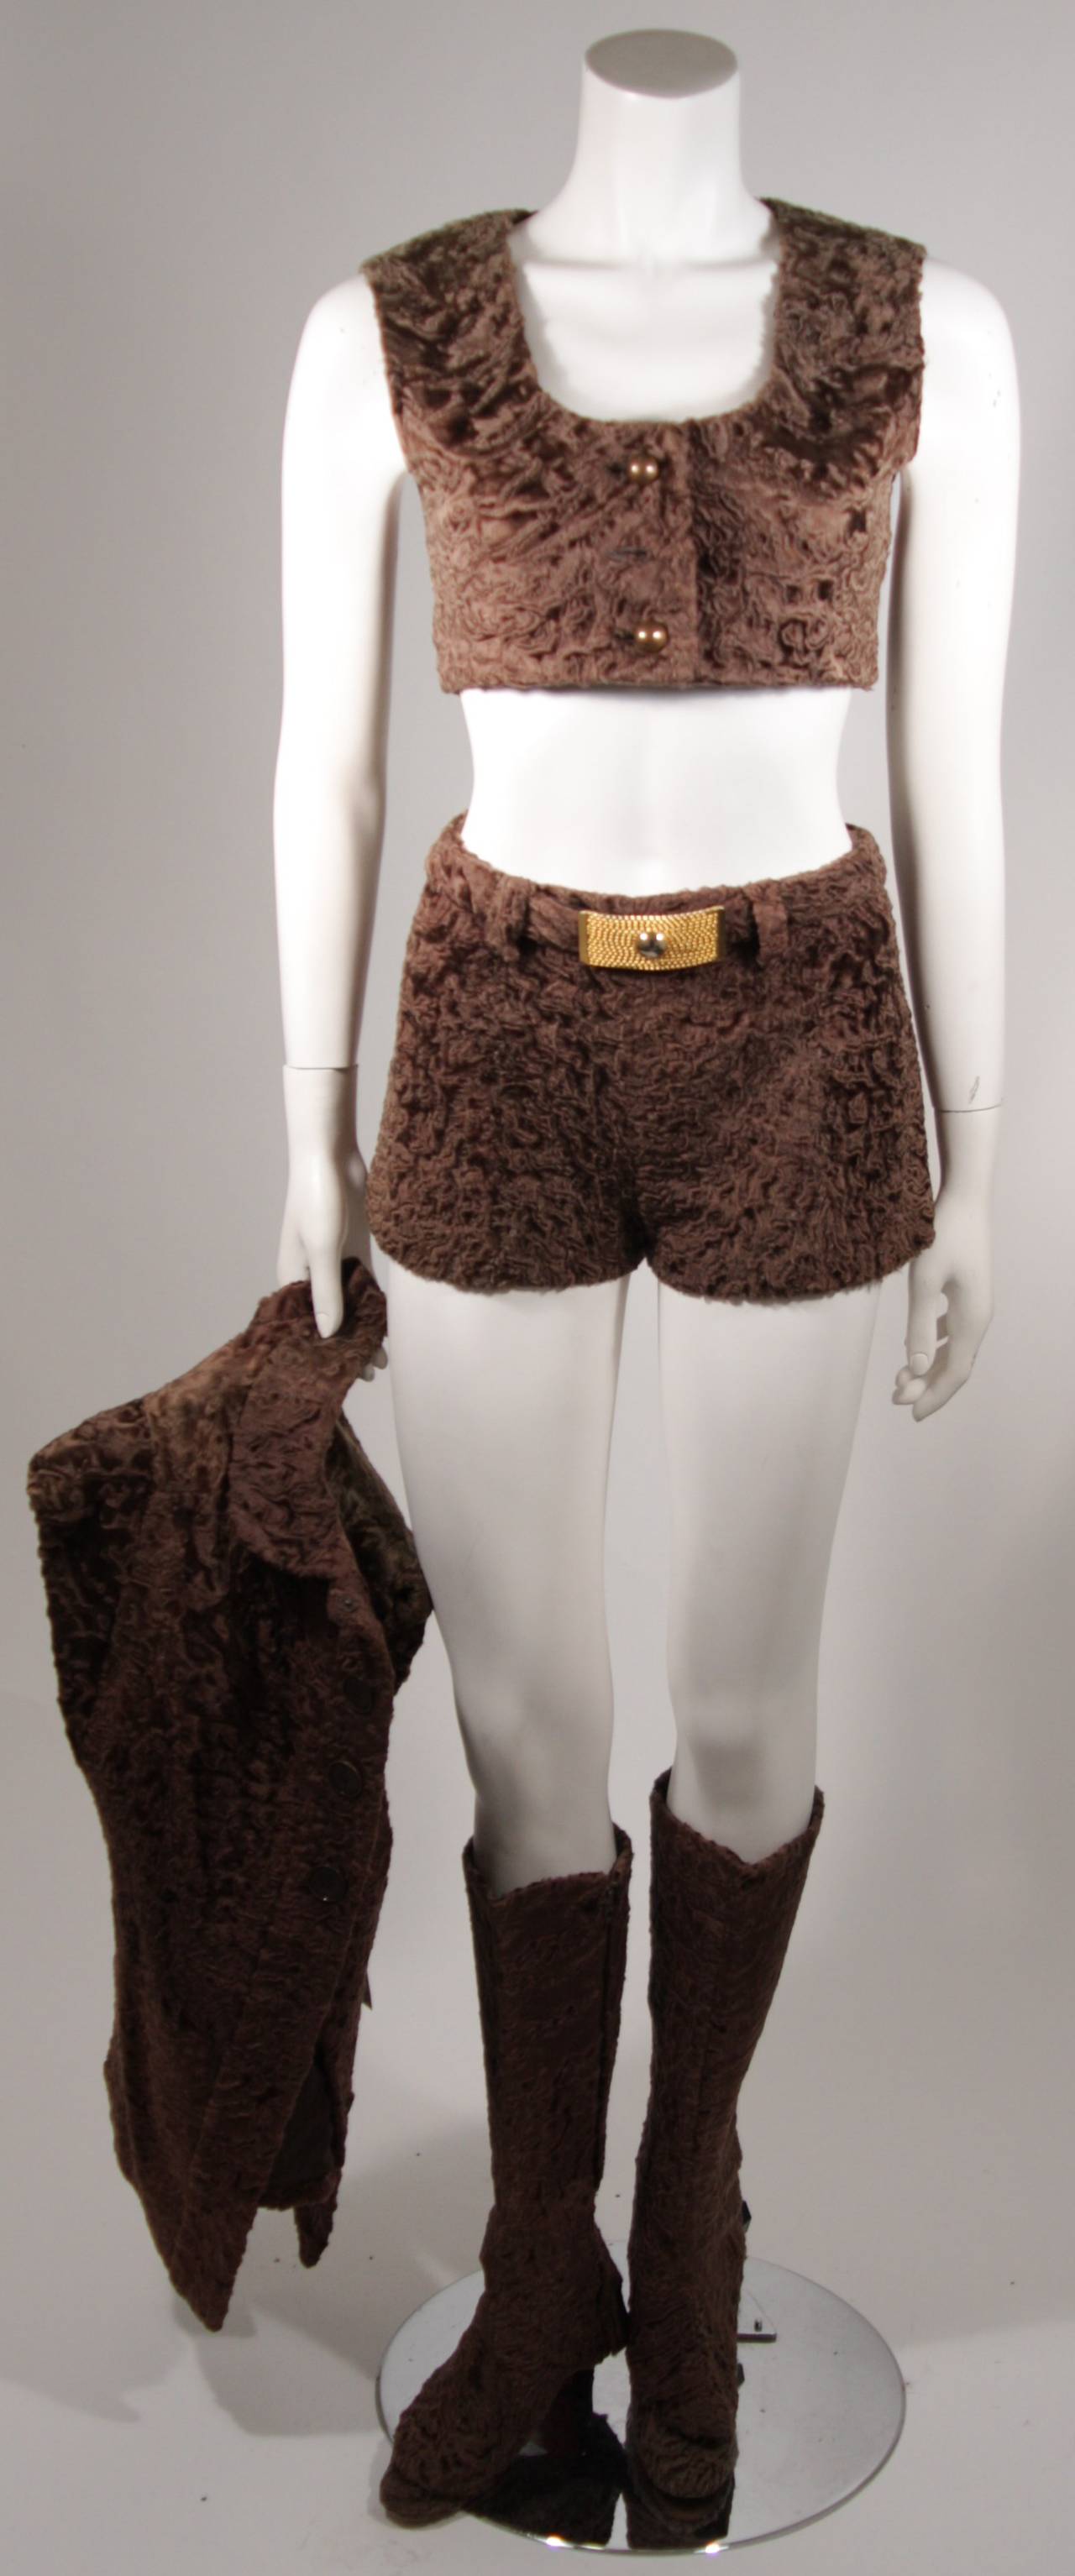 This Broadtail chocolate ensemble comes with a jacket, a vest (missing one button), and shorts with a zipper back closure accented with a belt. There are shoes (size unknown) with boot spats. The set is suffering from discoloration (which may